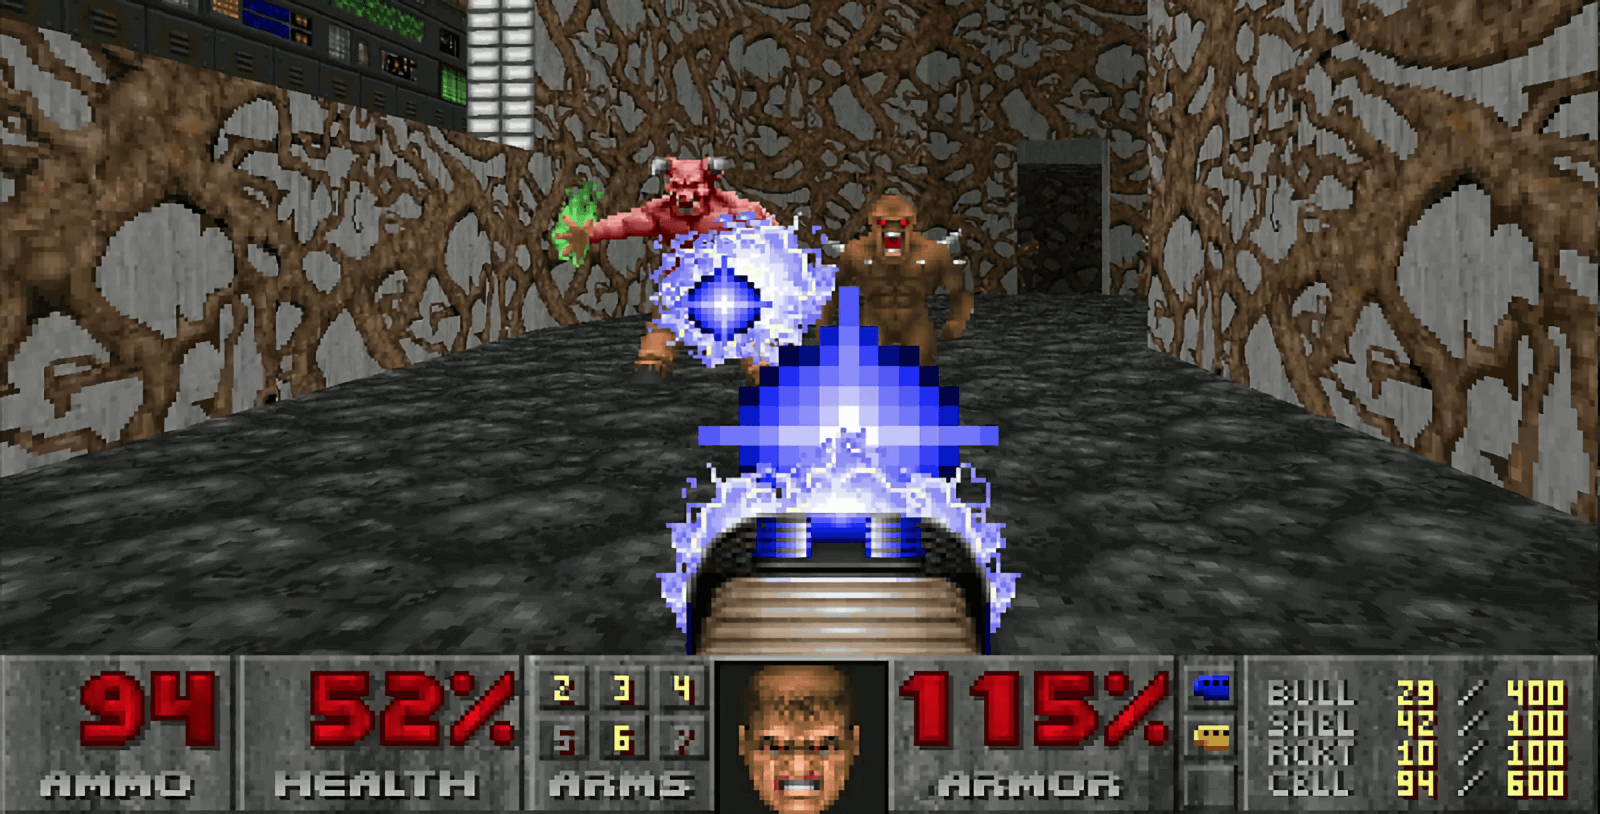 Bethesda is still updating the original Doom games from the 90s